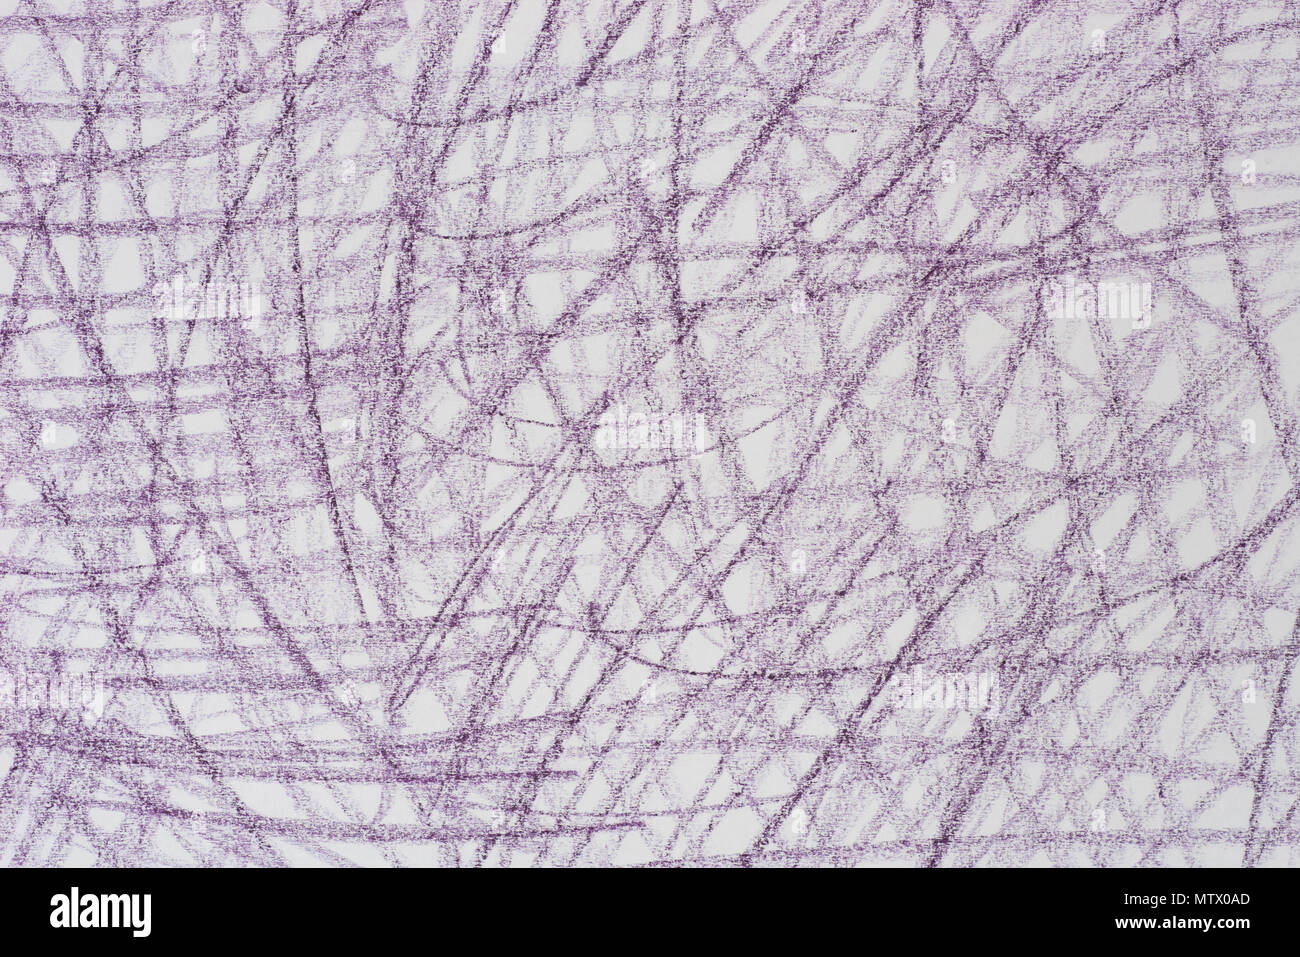 violet crayon doodles on white paper background texture Stock Photo